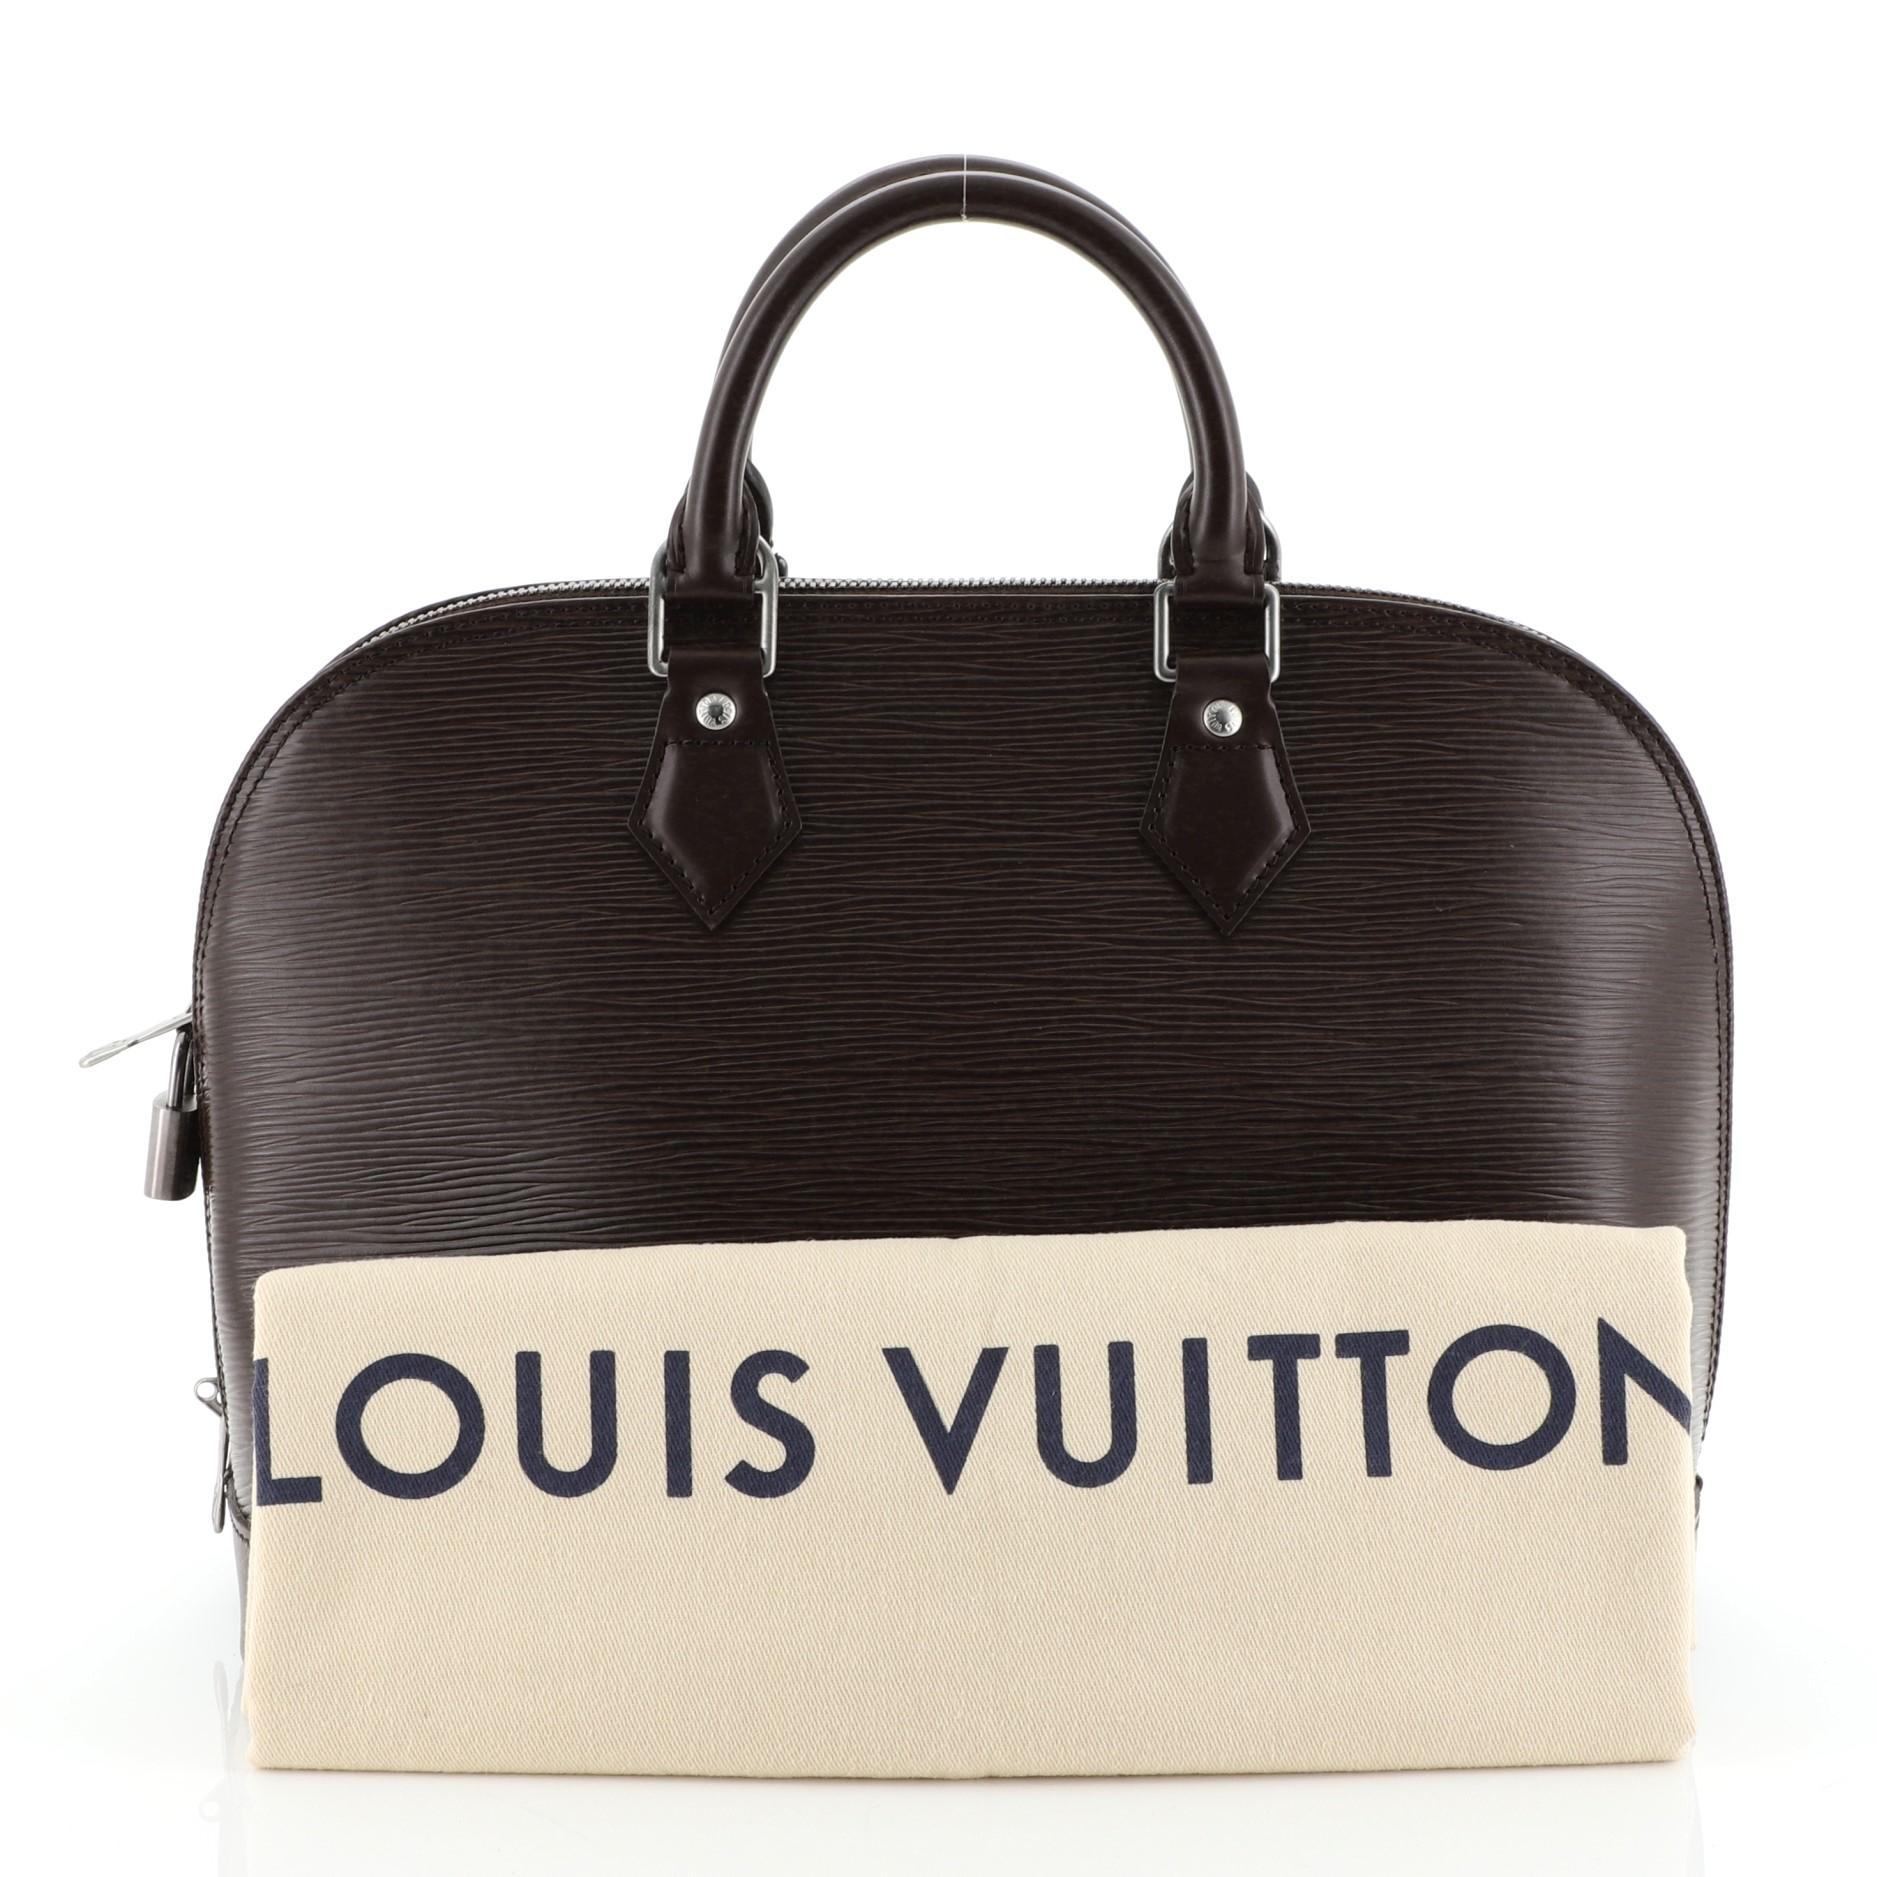 This Louis Vuitton Alma Handbag Epi Leather PM, crafted in brown epi leather, features dual rolled leather handles, protective base studs, and matte silver-tone hardware. Its all-around zip closure opens to a brown microfiber interior with slip